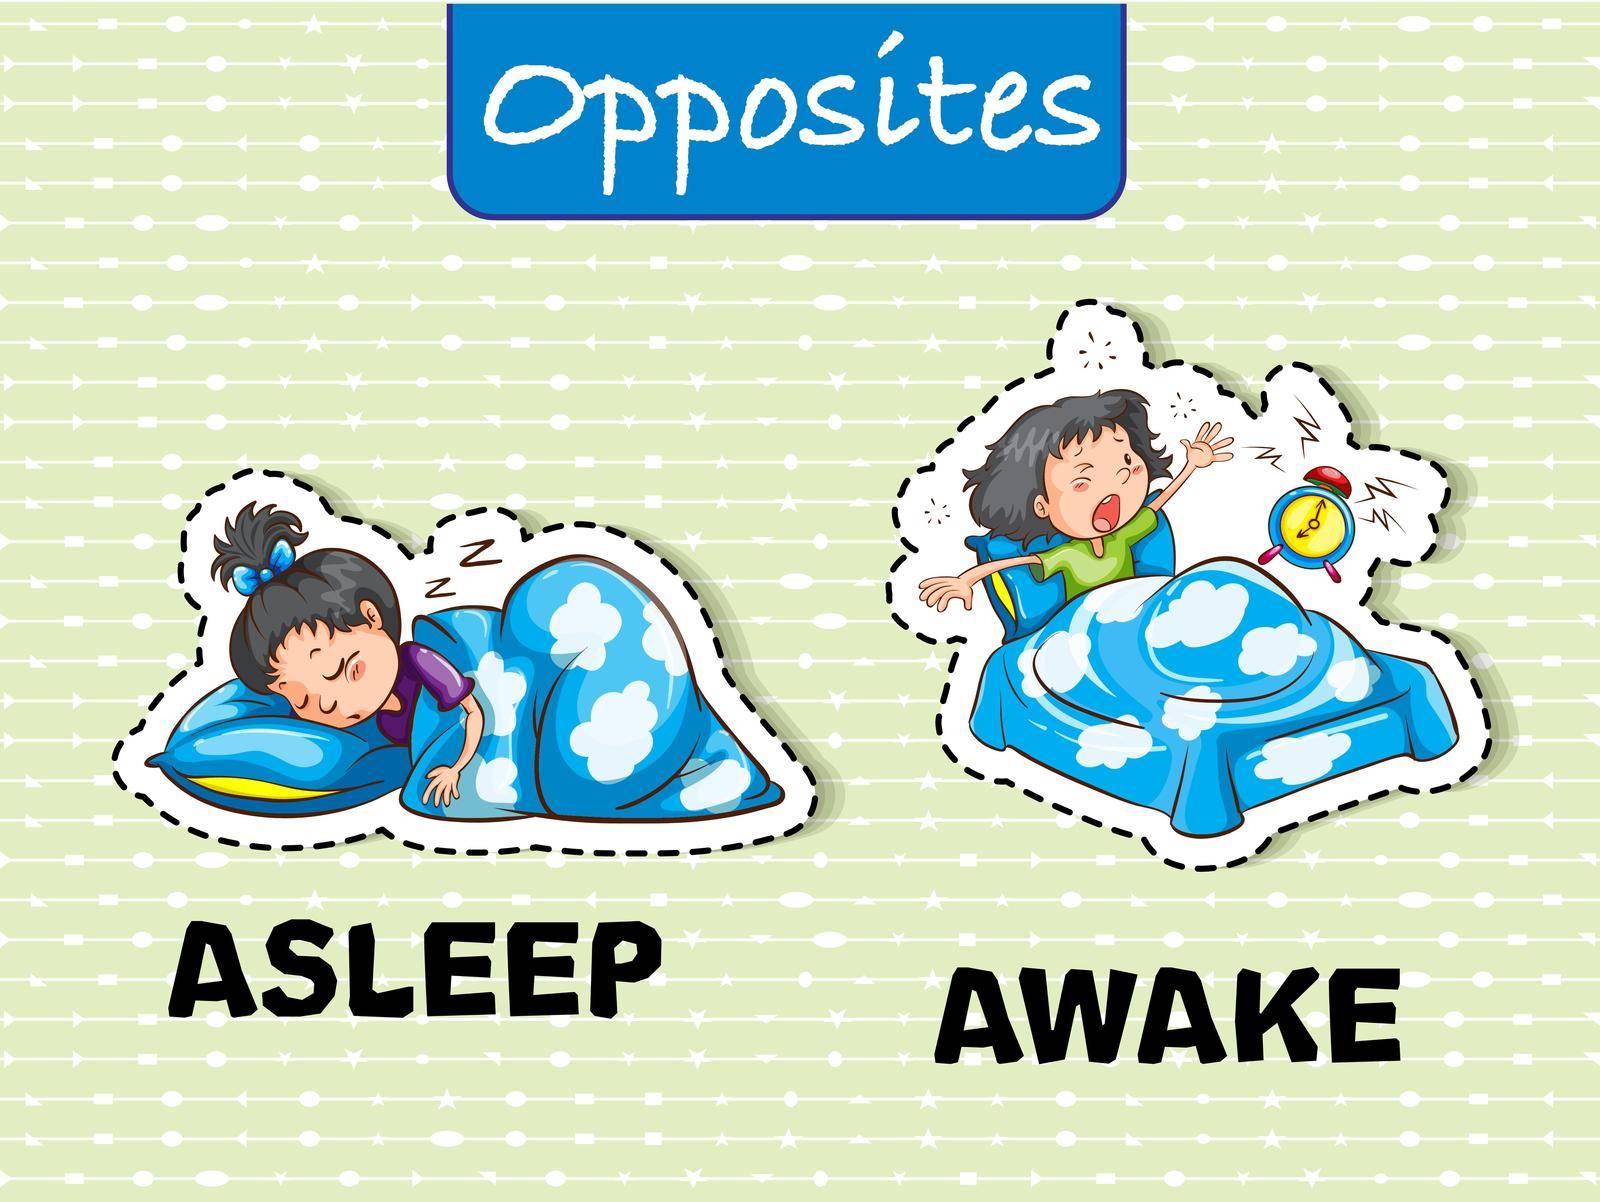 Opposite words for asleep and awake by iimages